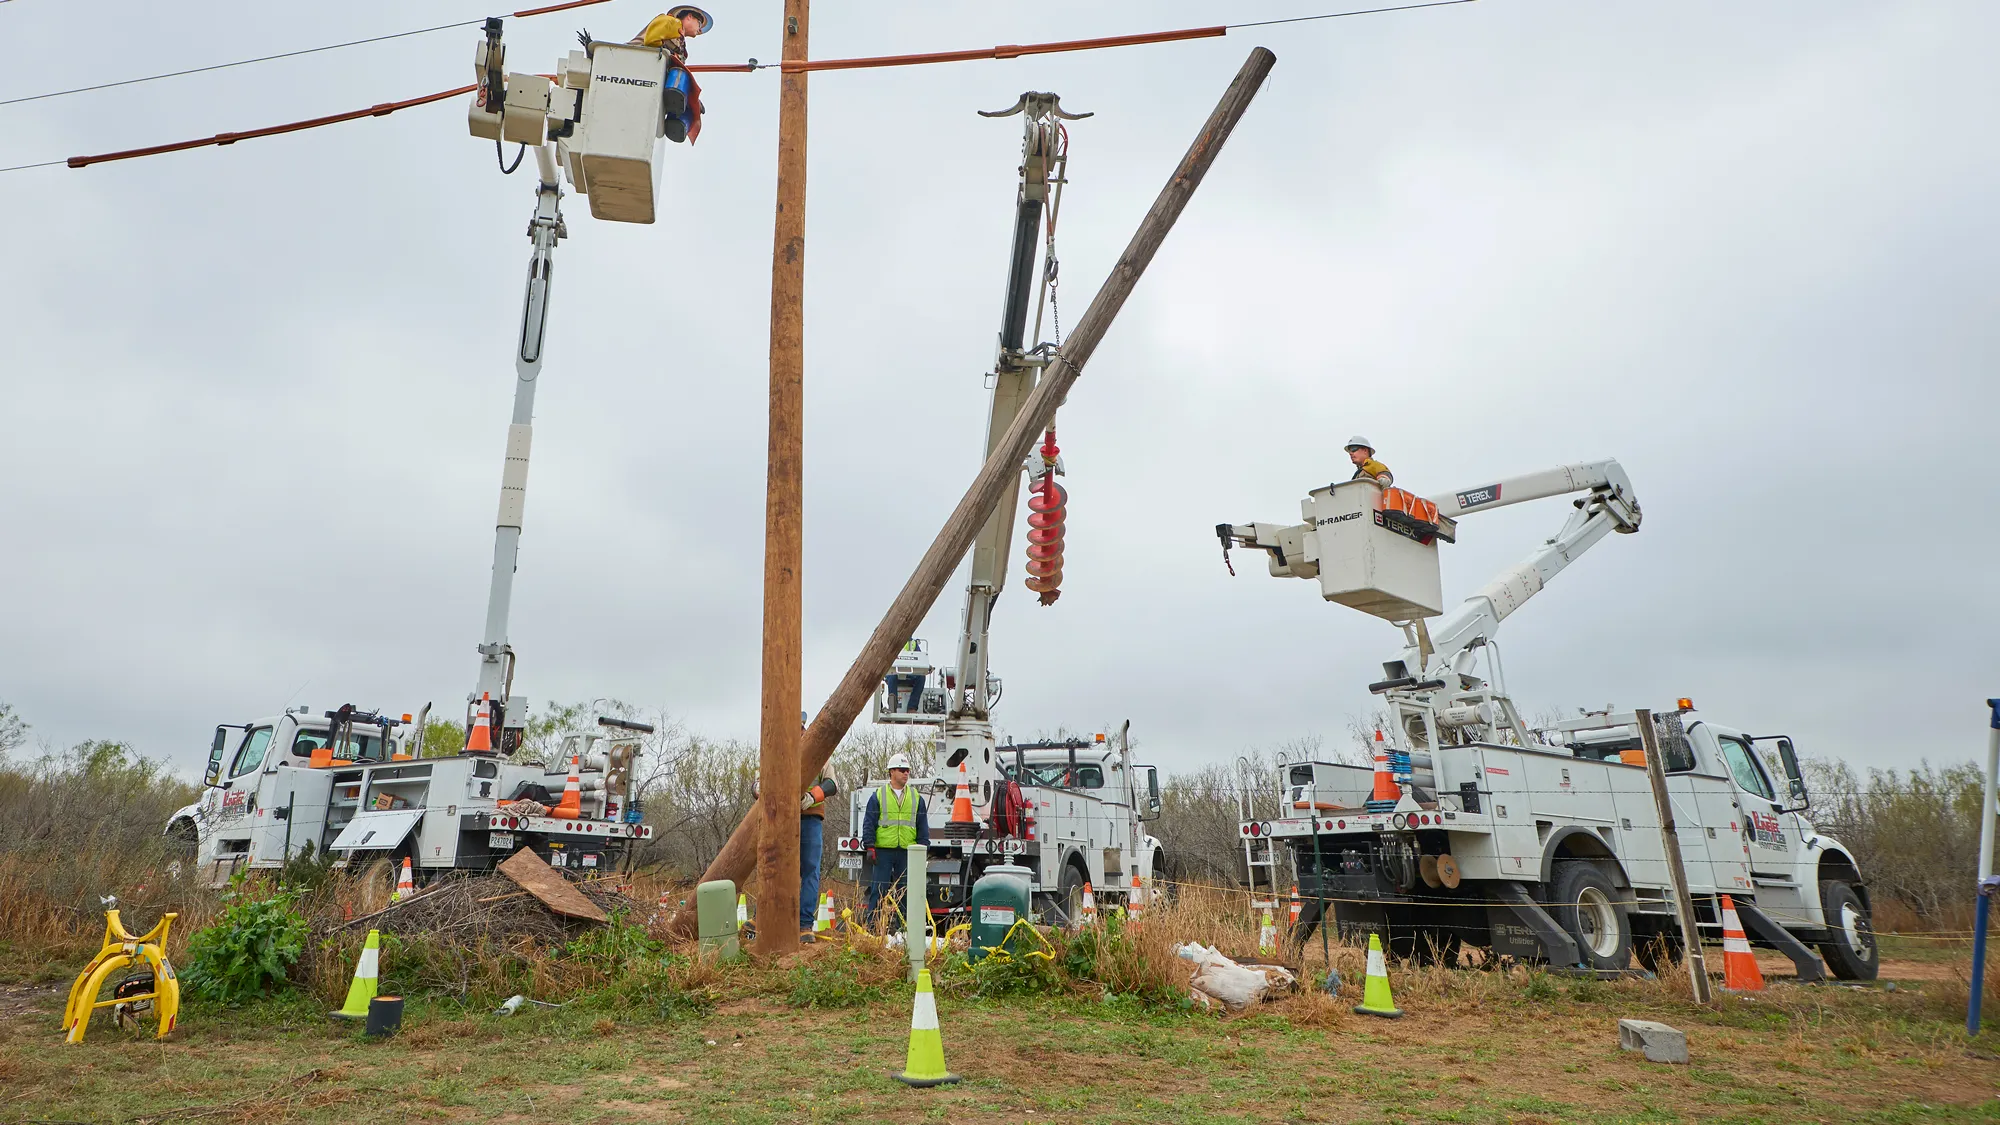 A Linetec worker fixes power lines in Laredo Texas.